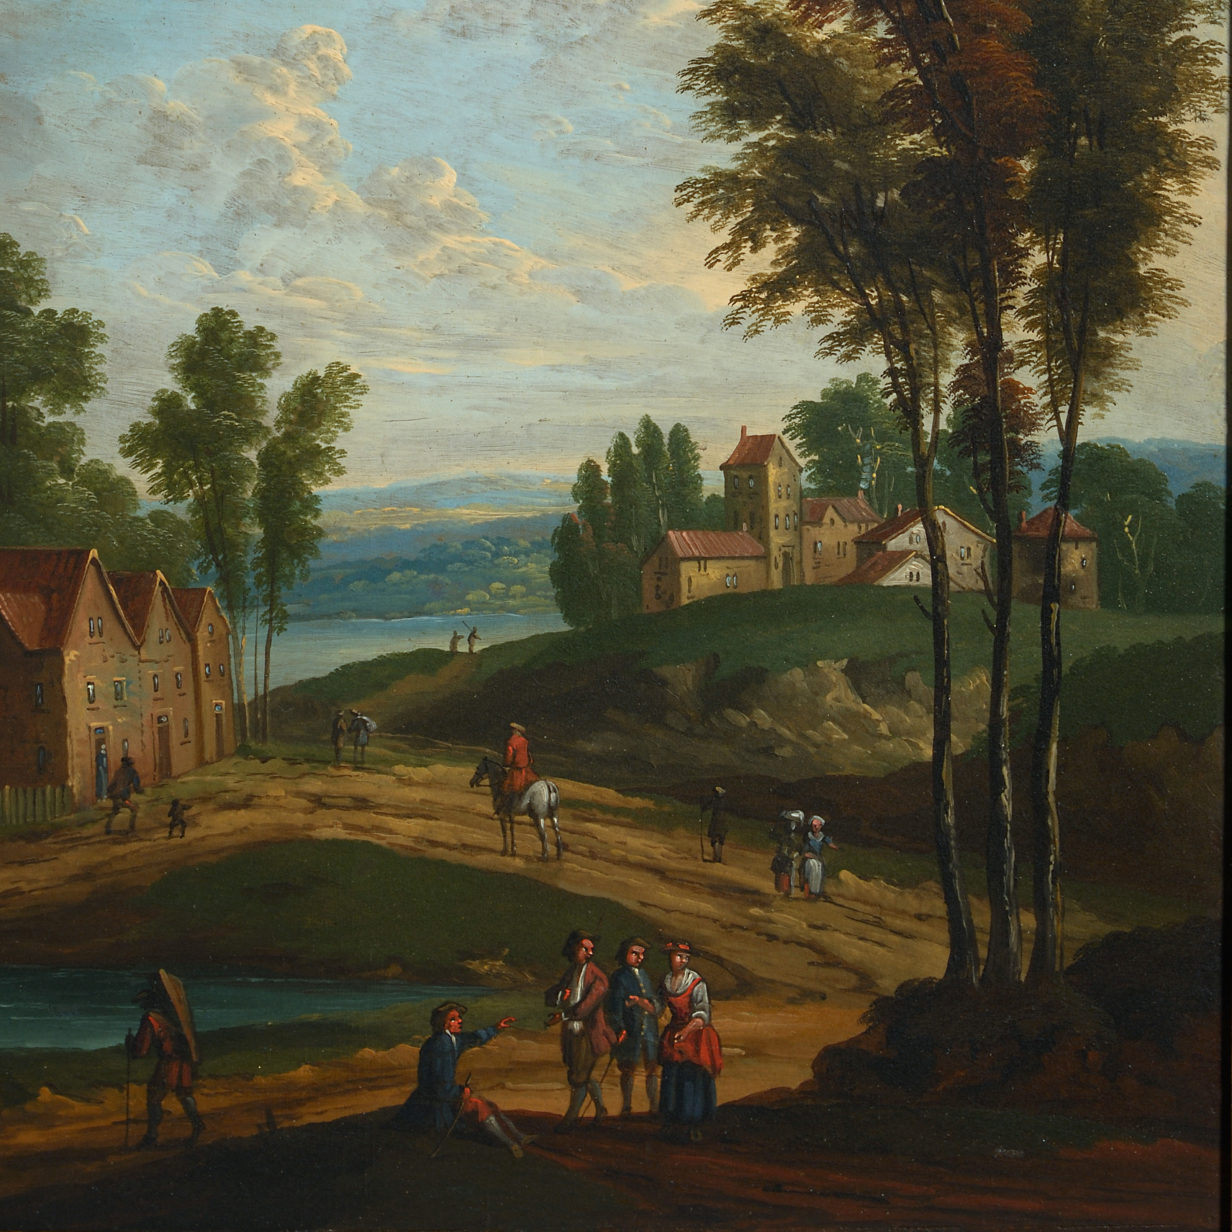 19th century landscapes in the 18th century manner